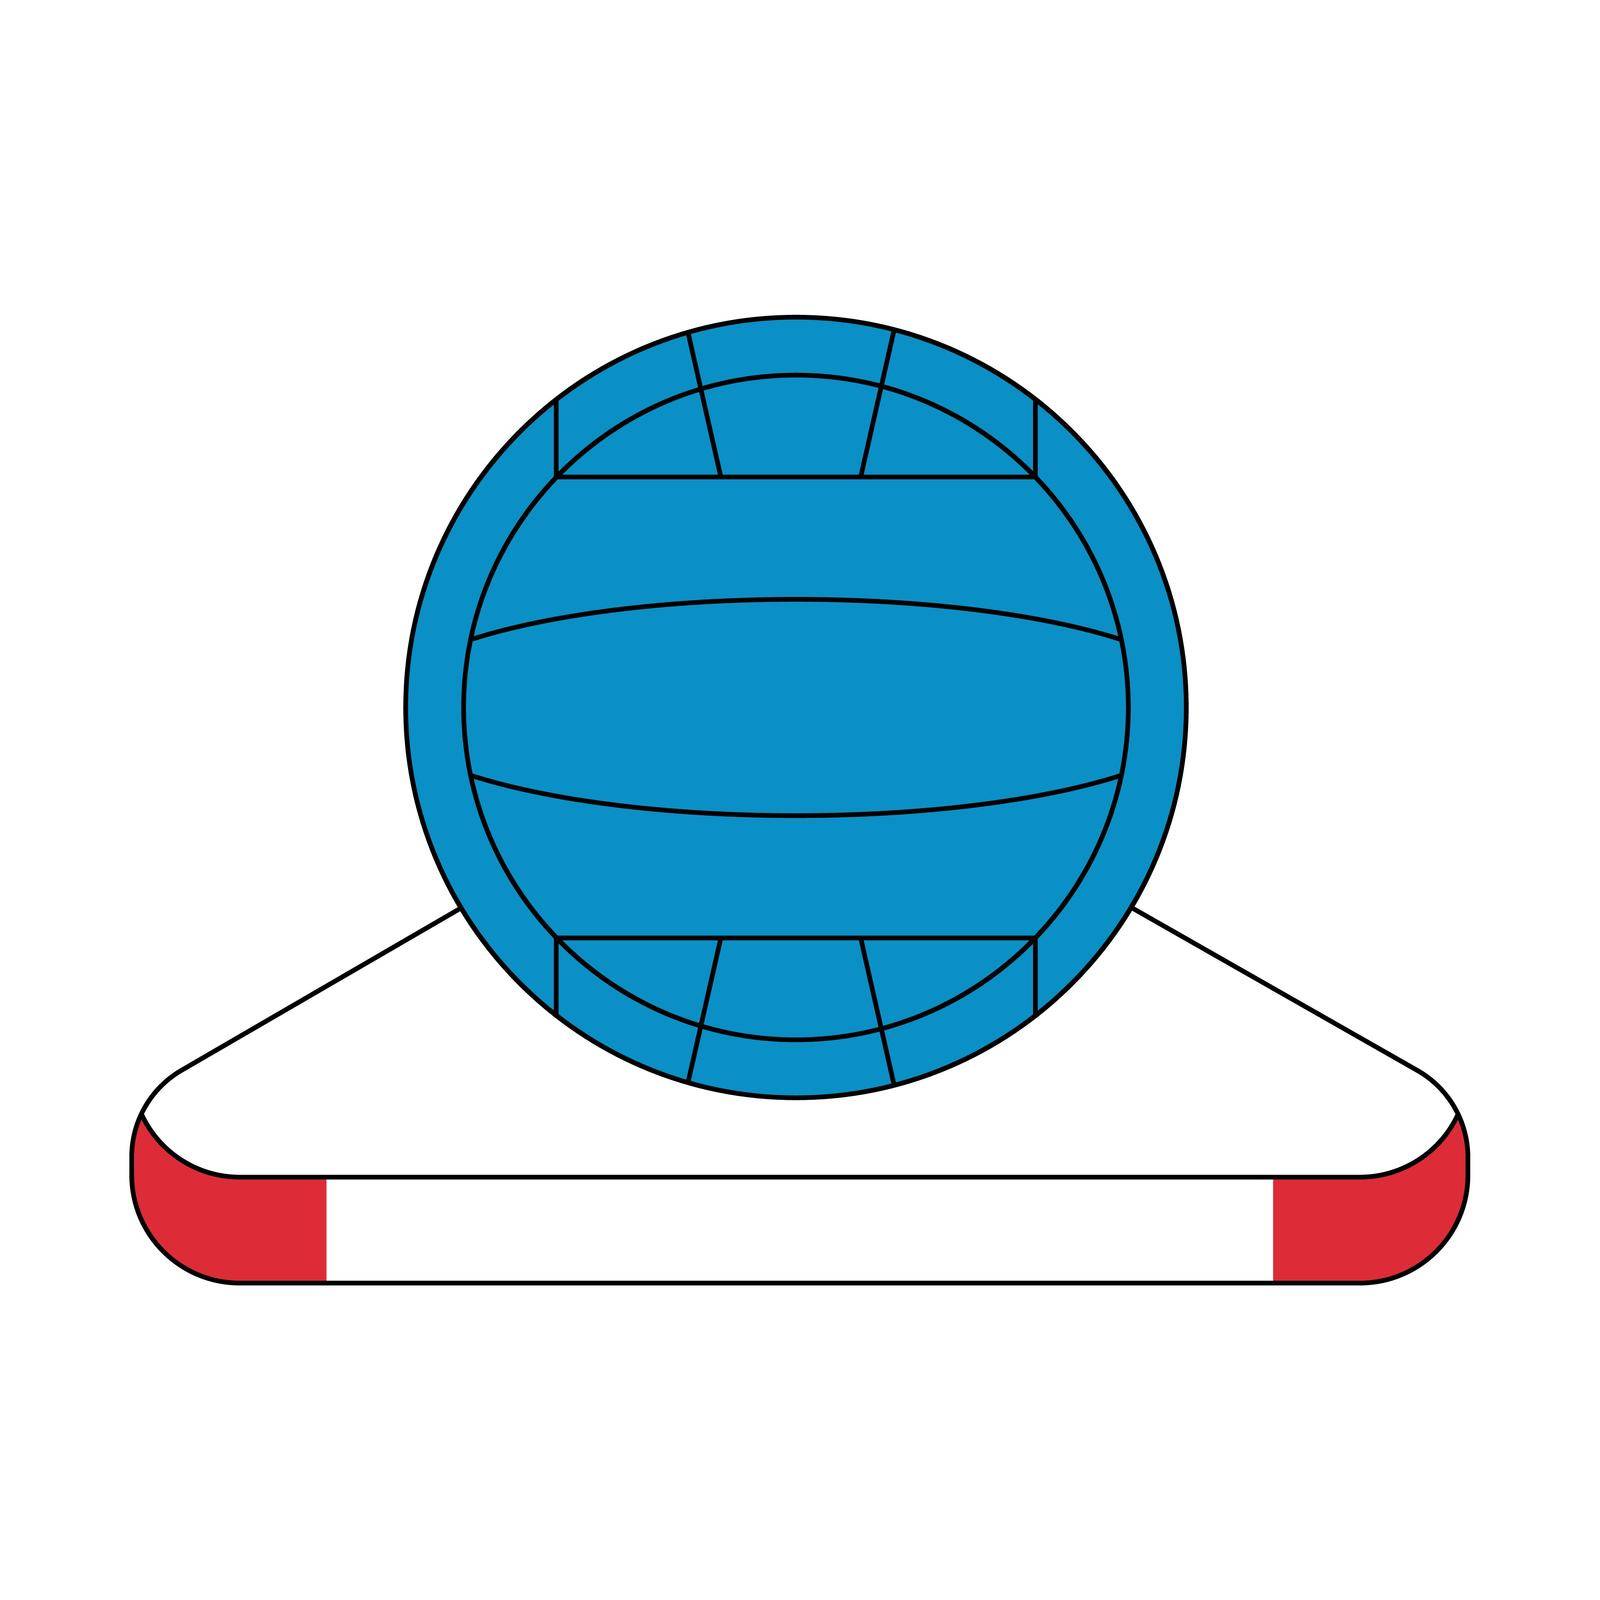 Water polo ball release pictogram vector illustration. by vas_evg